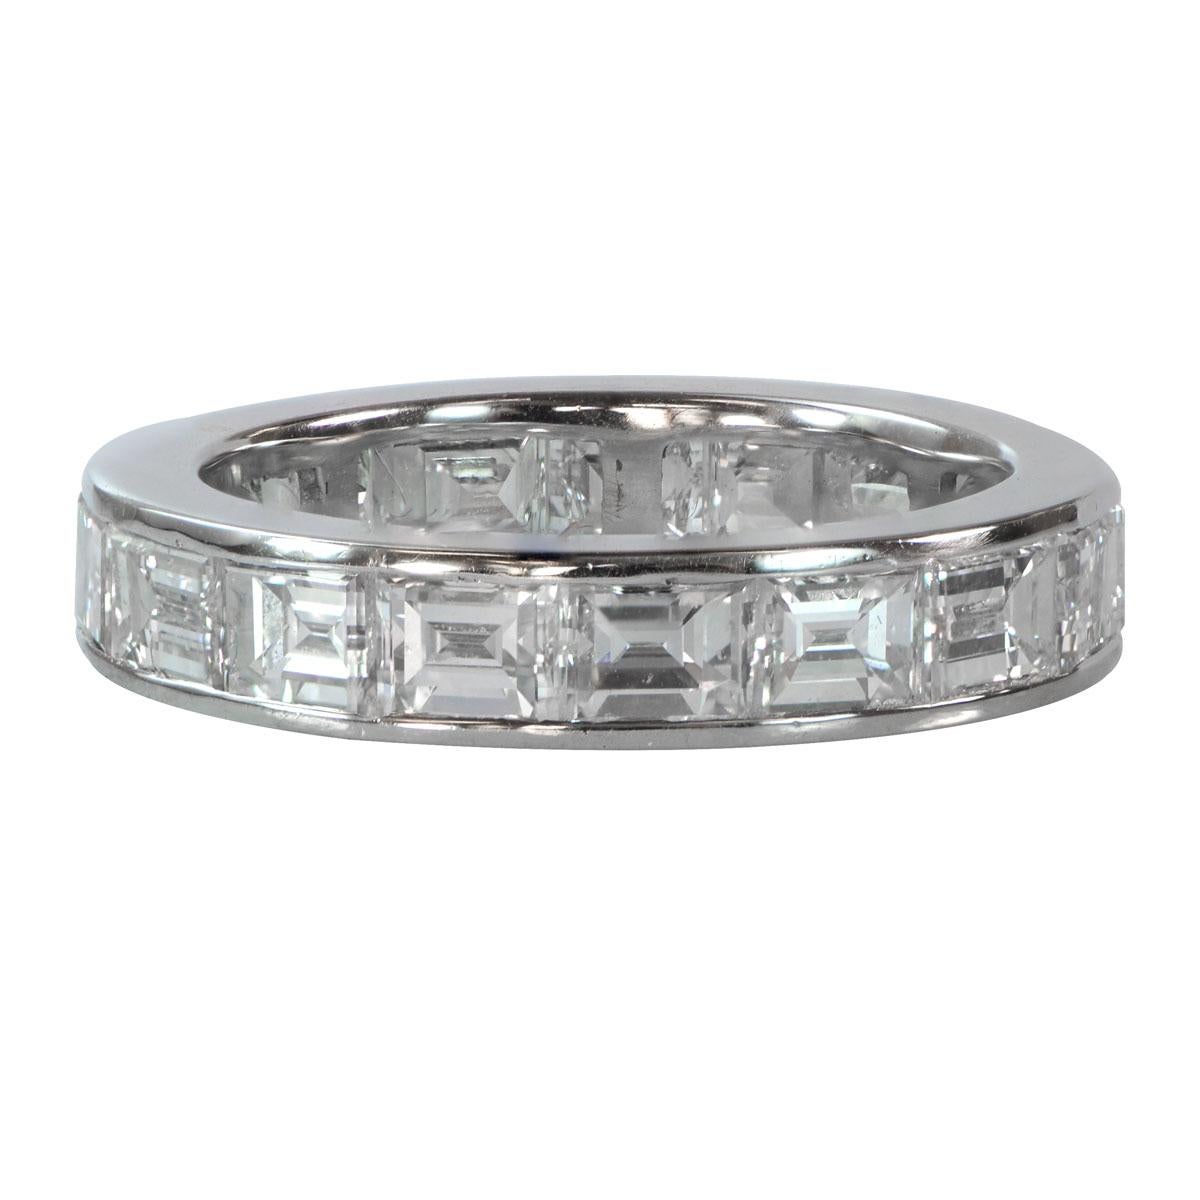 A breathtaking wedding band adorned with emerald-cut diamonds, channel-set within a beautiful platinum eternity band. The band boasts a 4mm width, creating a timeless and elegant look. The approximate diamond weight is 3.5 carats, showcasing